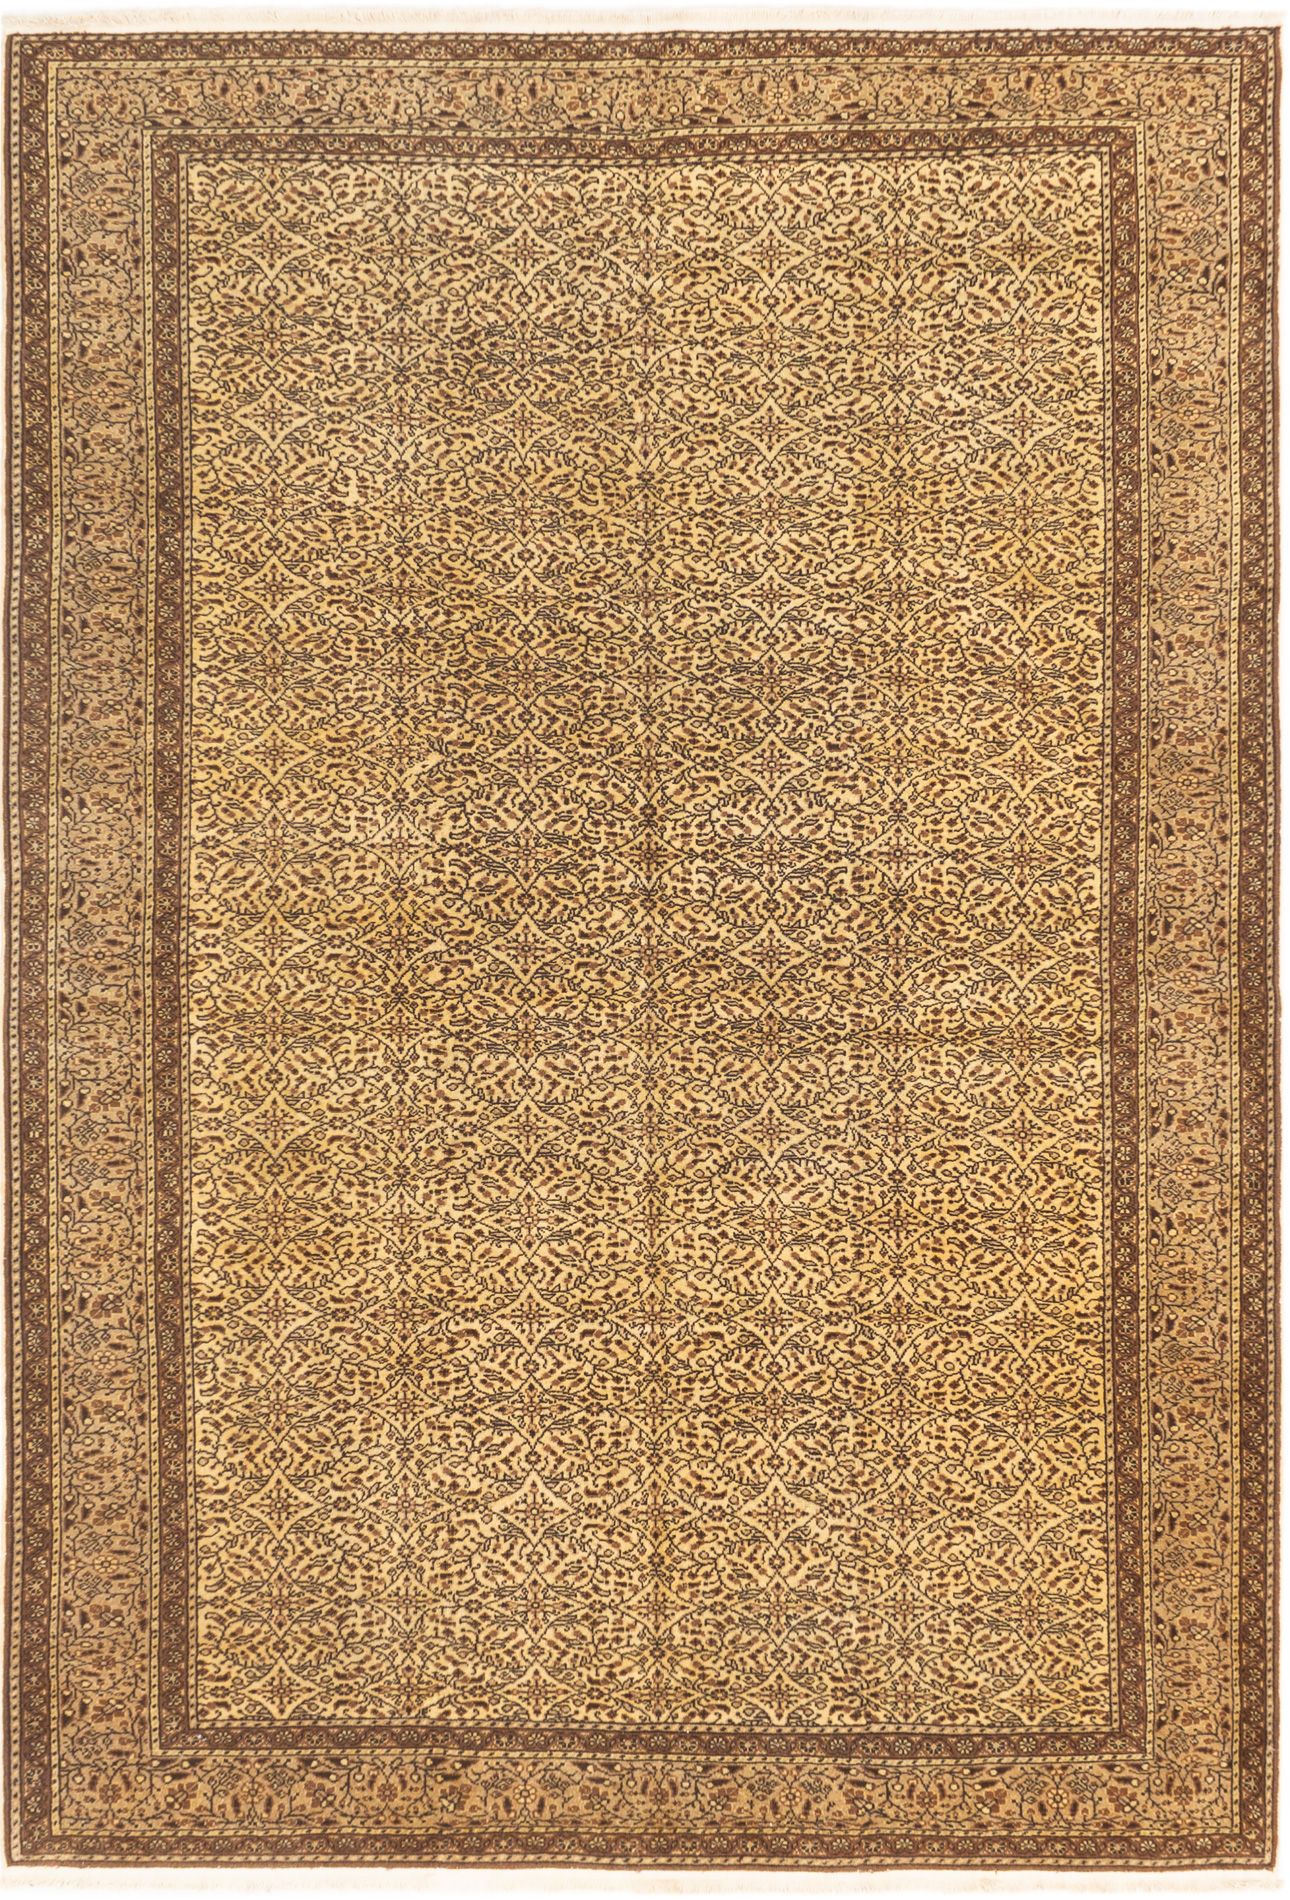 Hand-knotted Keisari Cream Wool Rug 6'7" x 9'8"  Size: 6'7" x 9'8"  